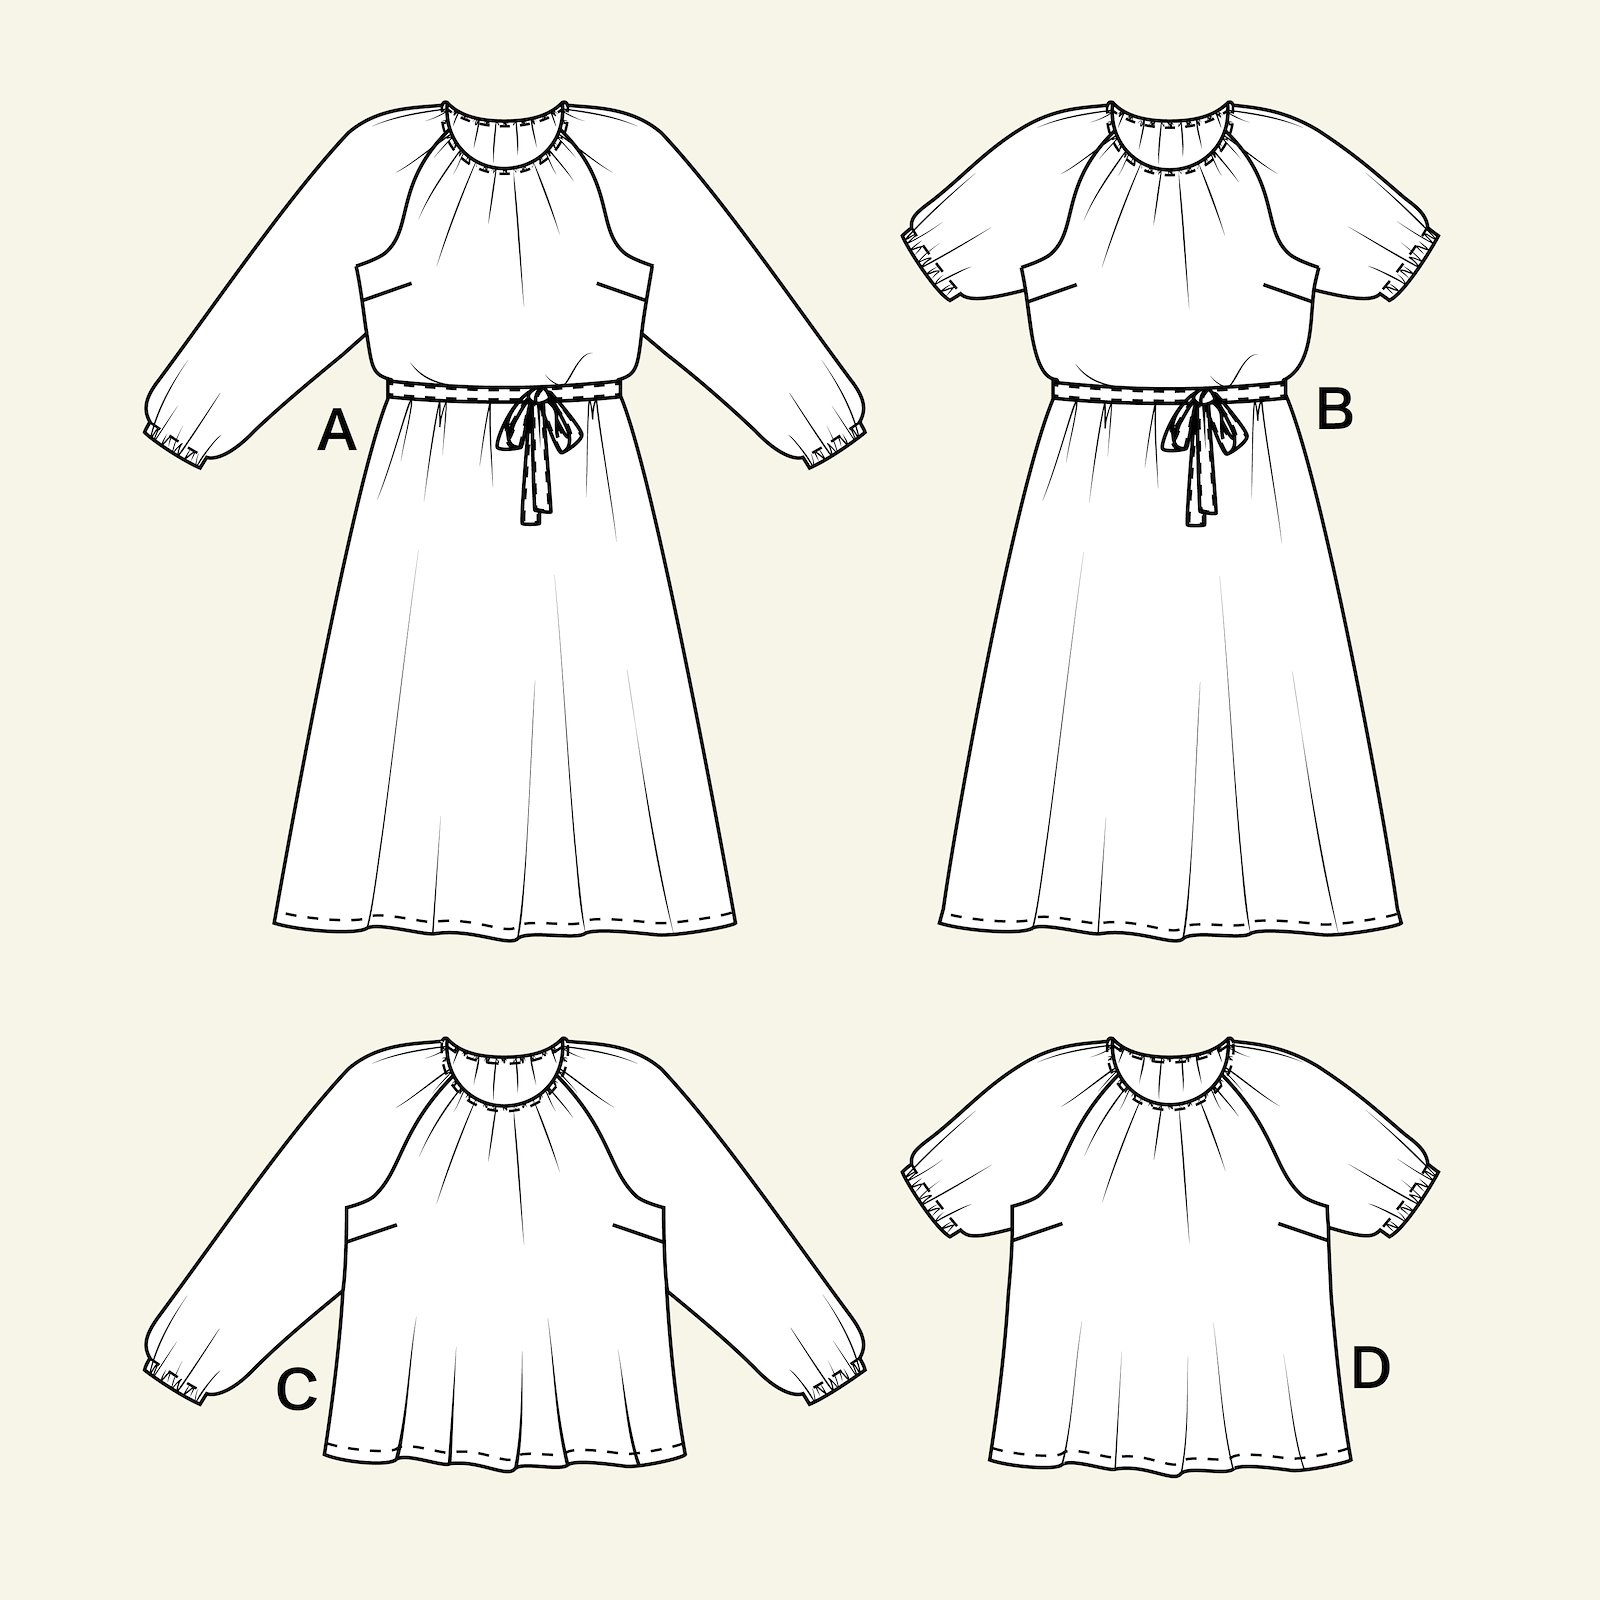 Dress with belt and blouse, 44/16 p23167000_p23167001_p23167002_p23167003_p23167004_pack_b.png